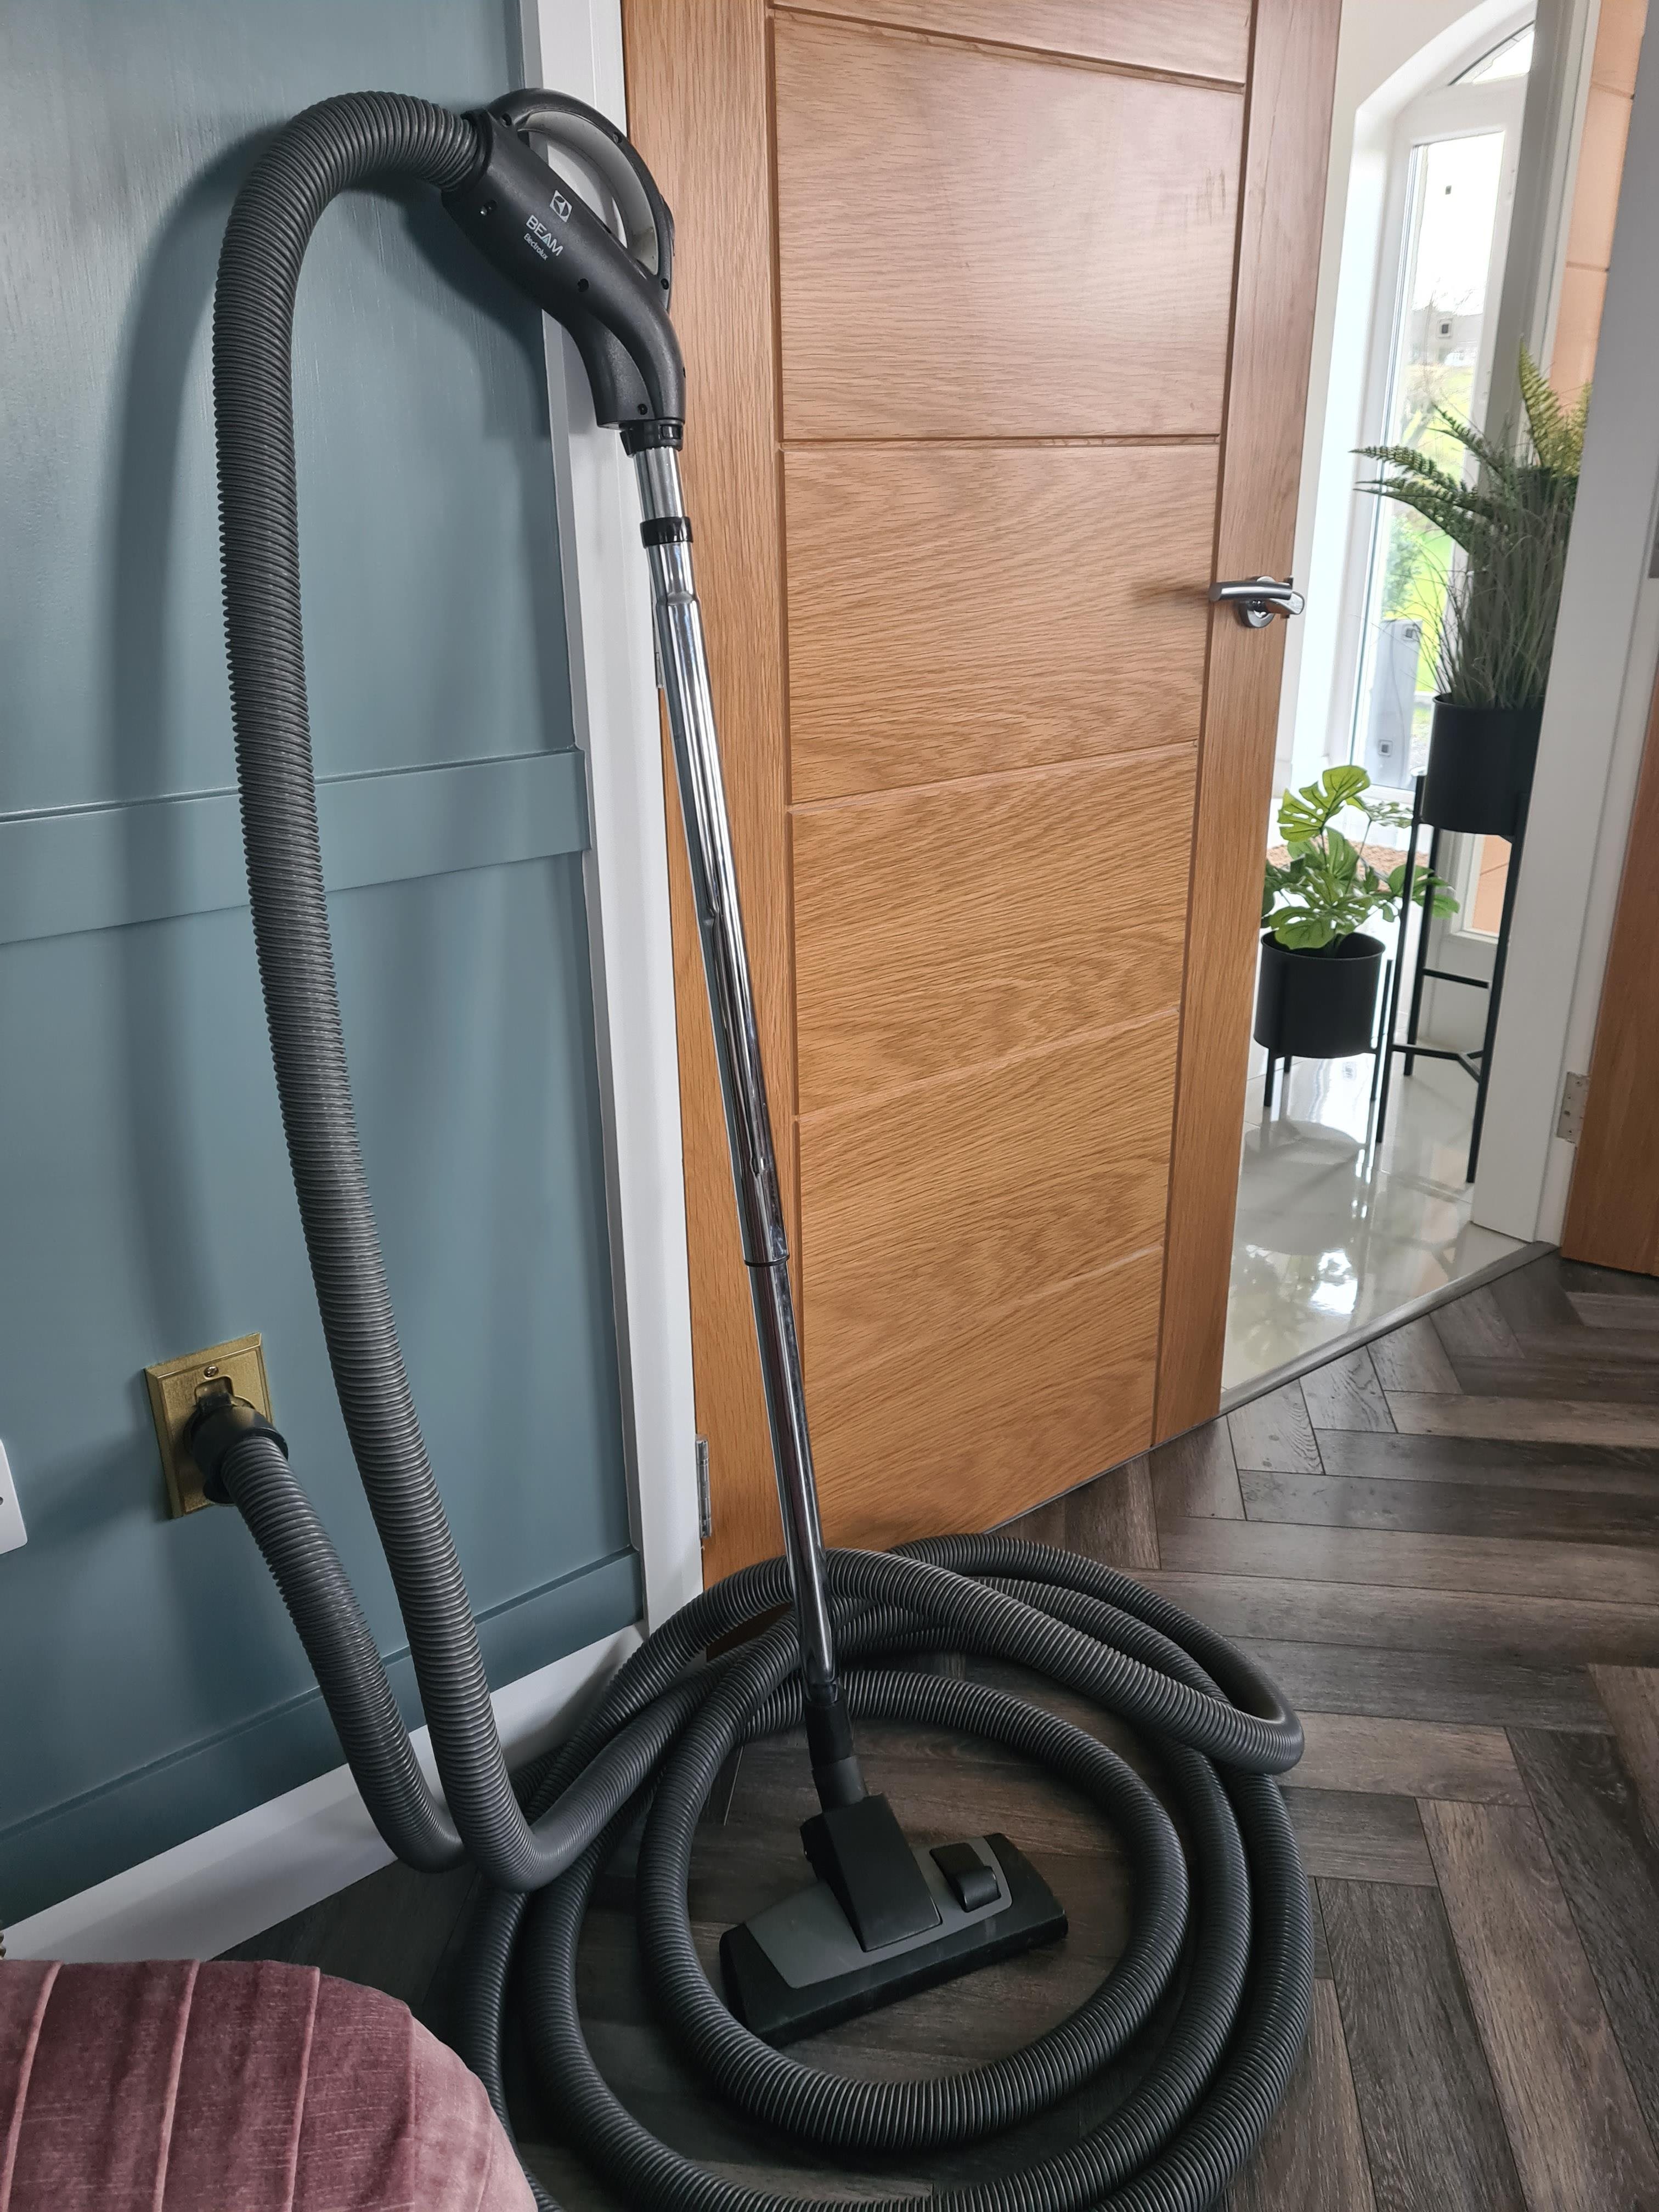 Beam Central vacuum hose against living room wall